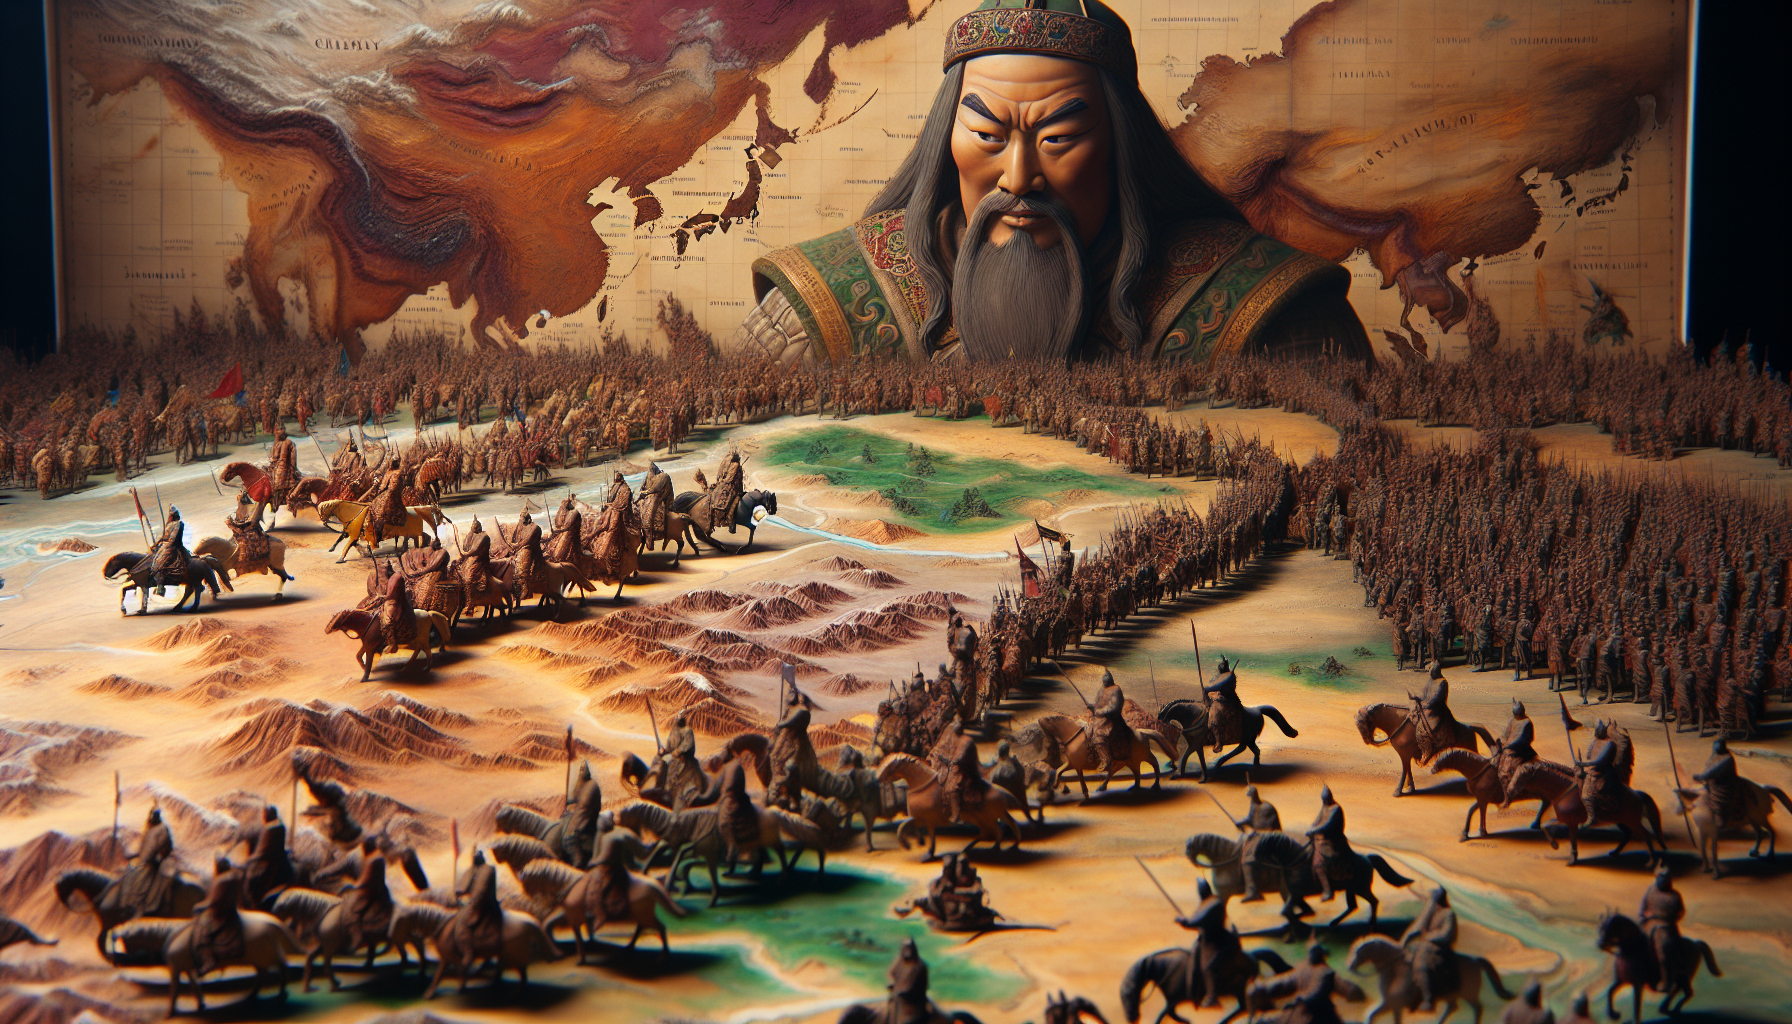 Artistic depiction of the rapid expansion of the Mongol Empire across Eurasia